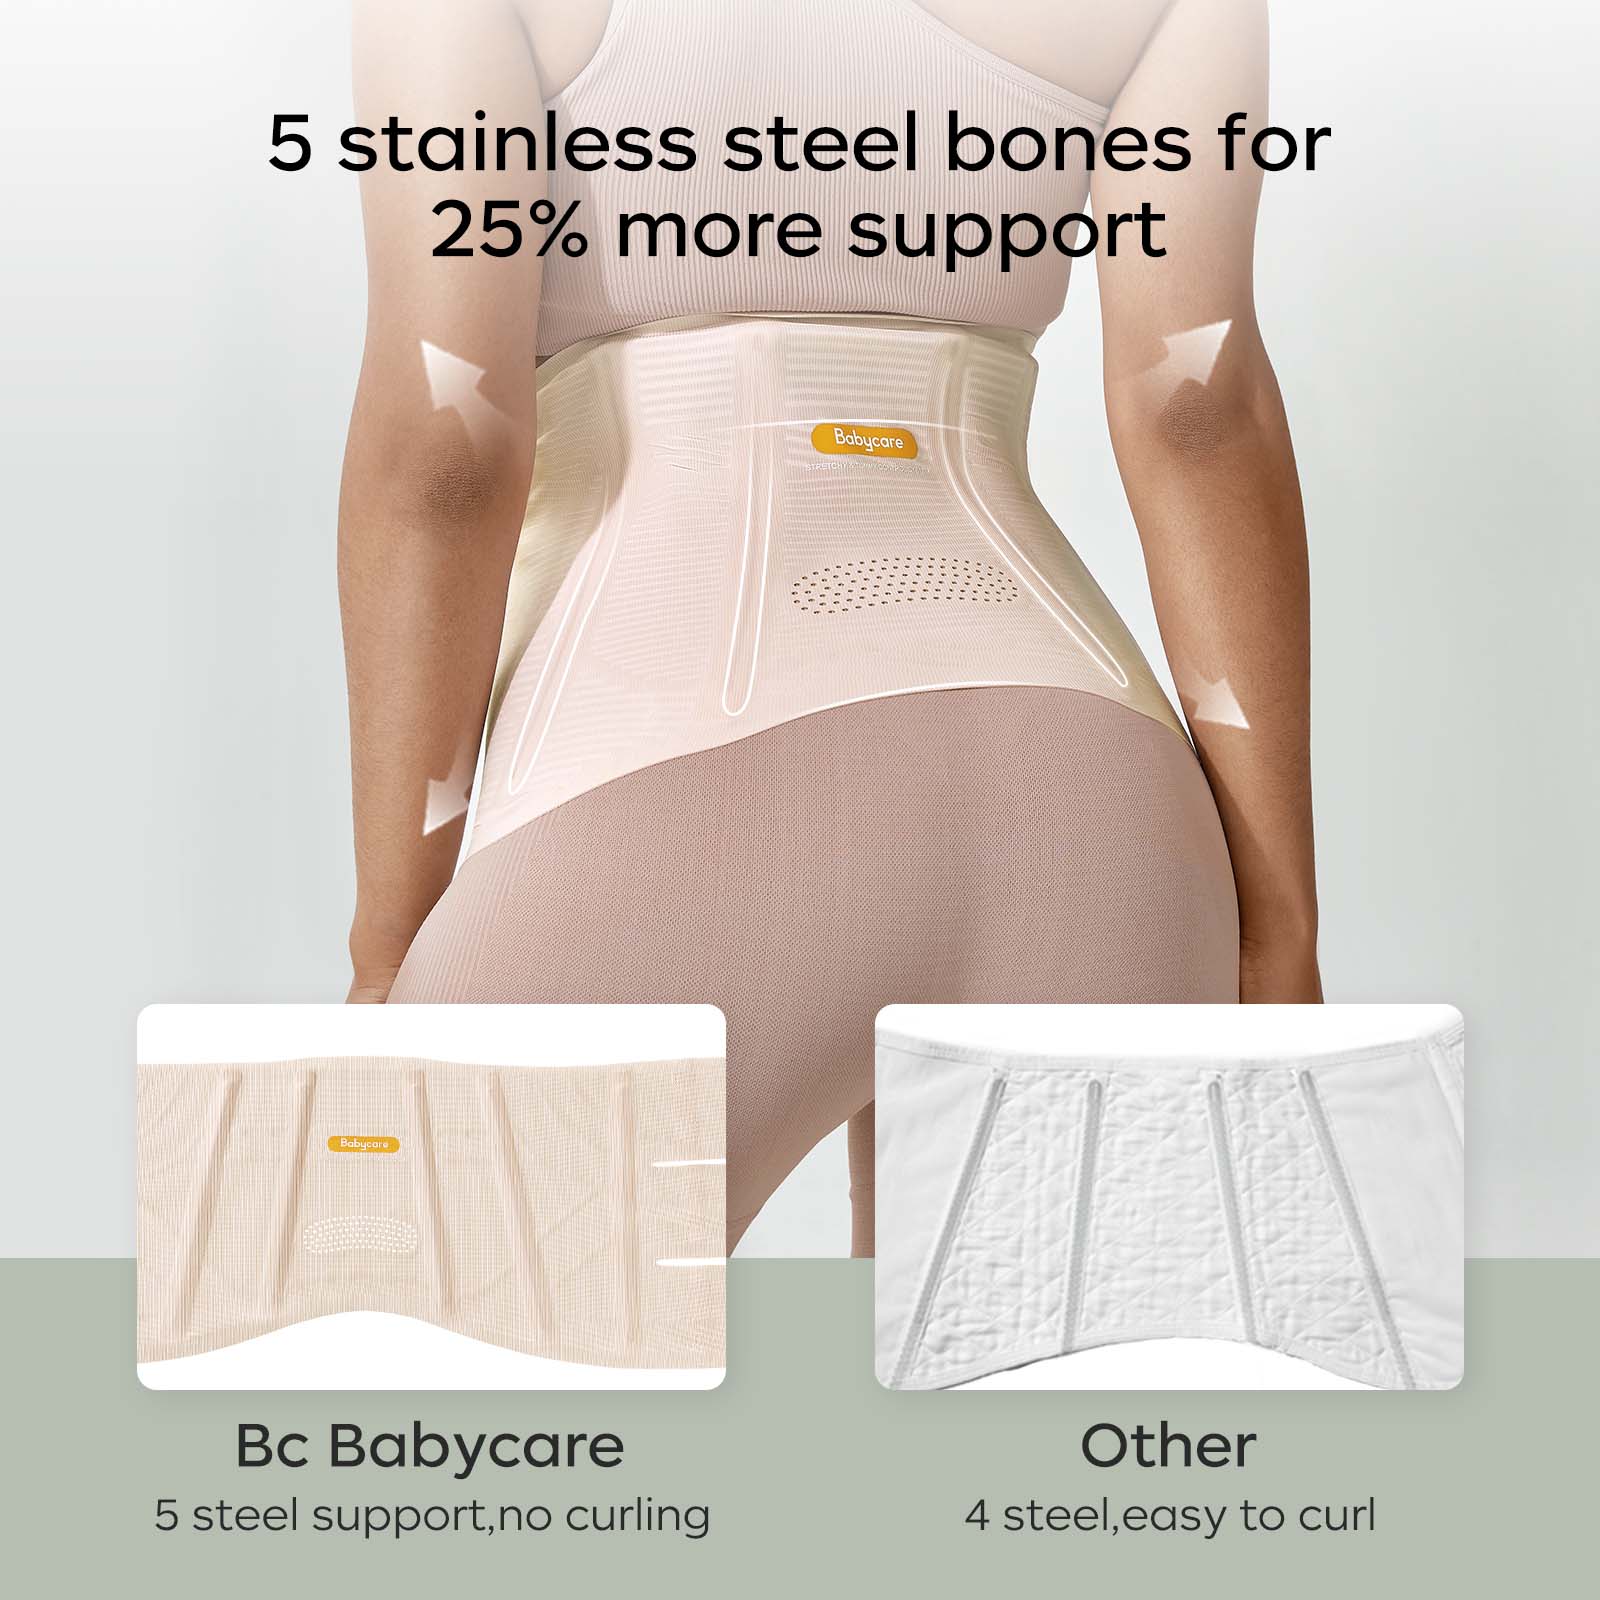 Shapewear That Can Help Support Your Puson